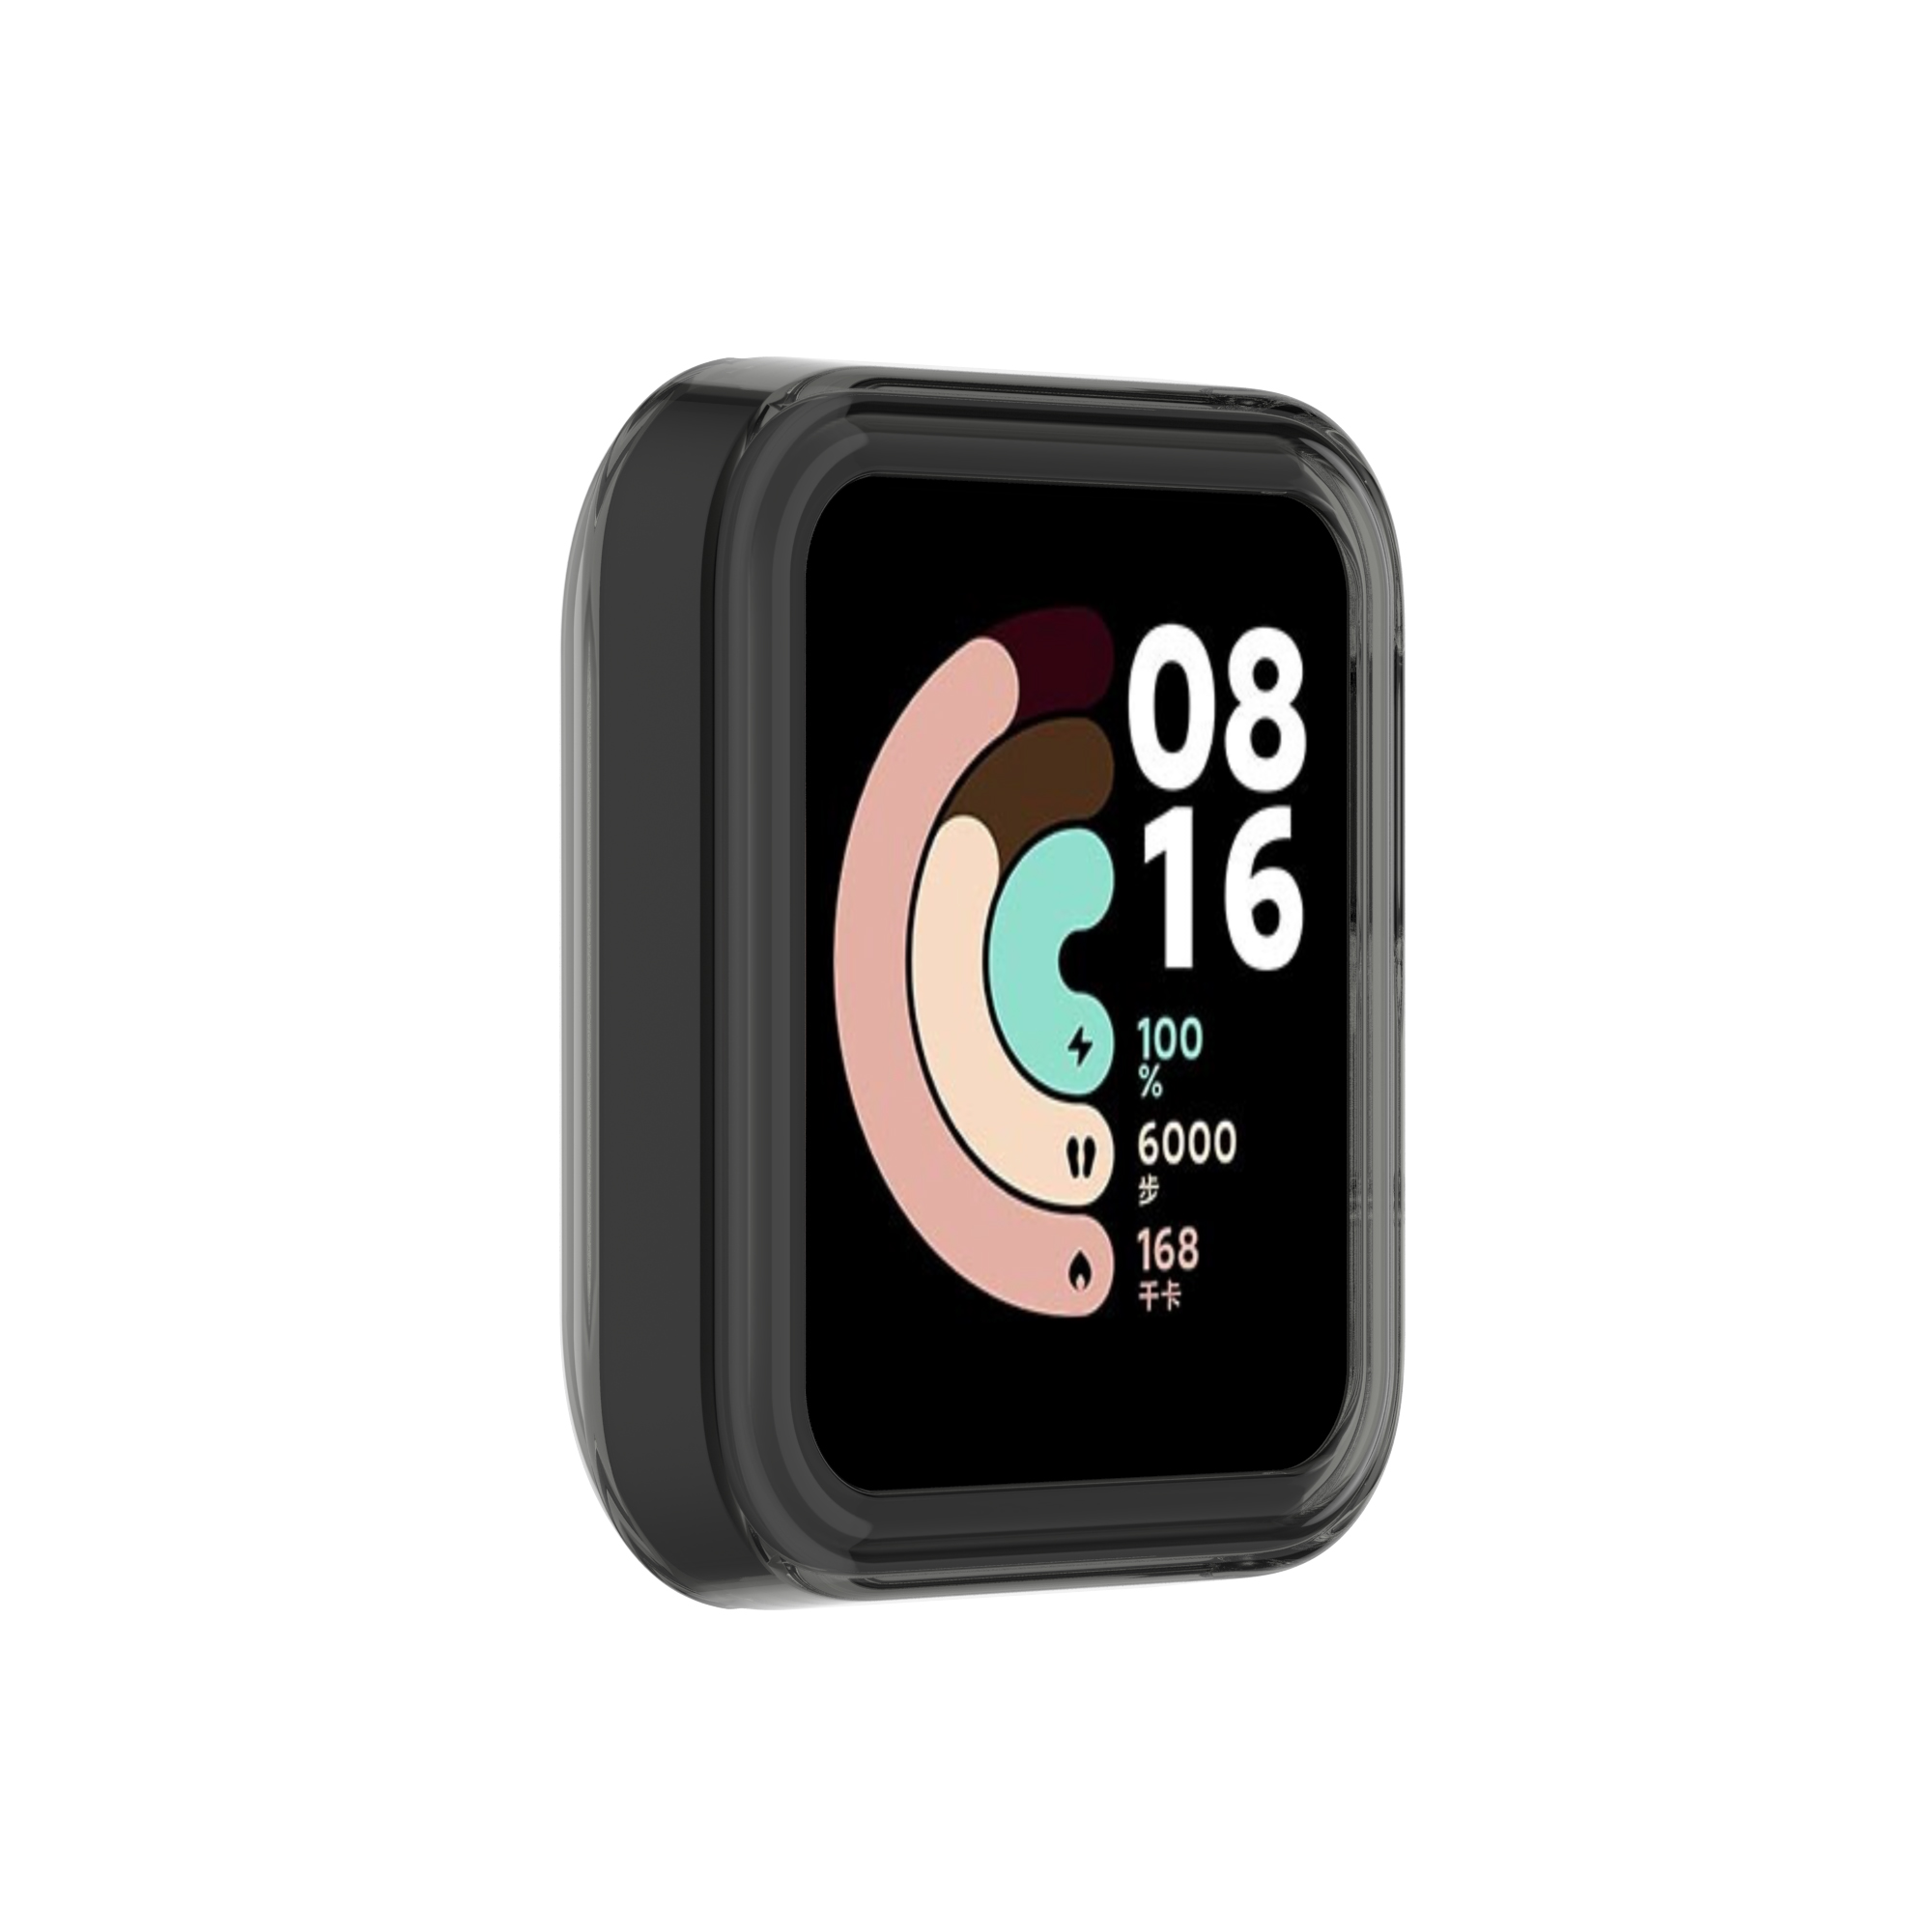 Bakeey-Transparent-TPU-Half-pack-Watch-Case-Cover-Watch-Protector-For-Xiaomi-Mi-Watch-Lite-1819481-10